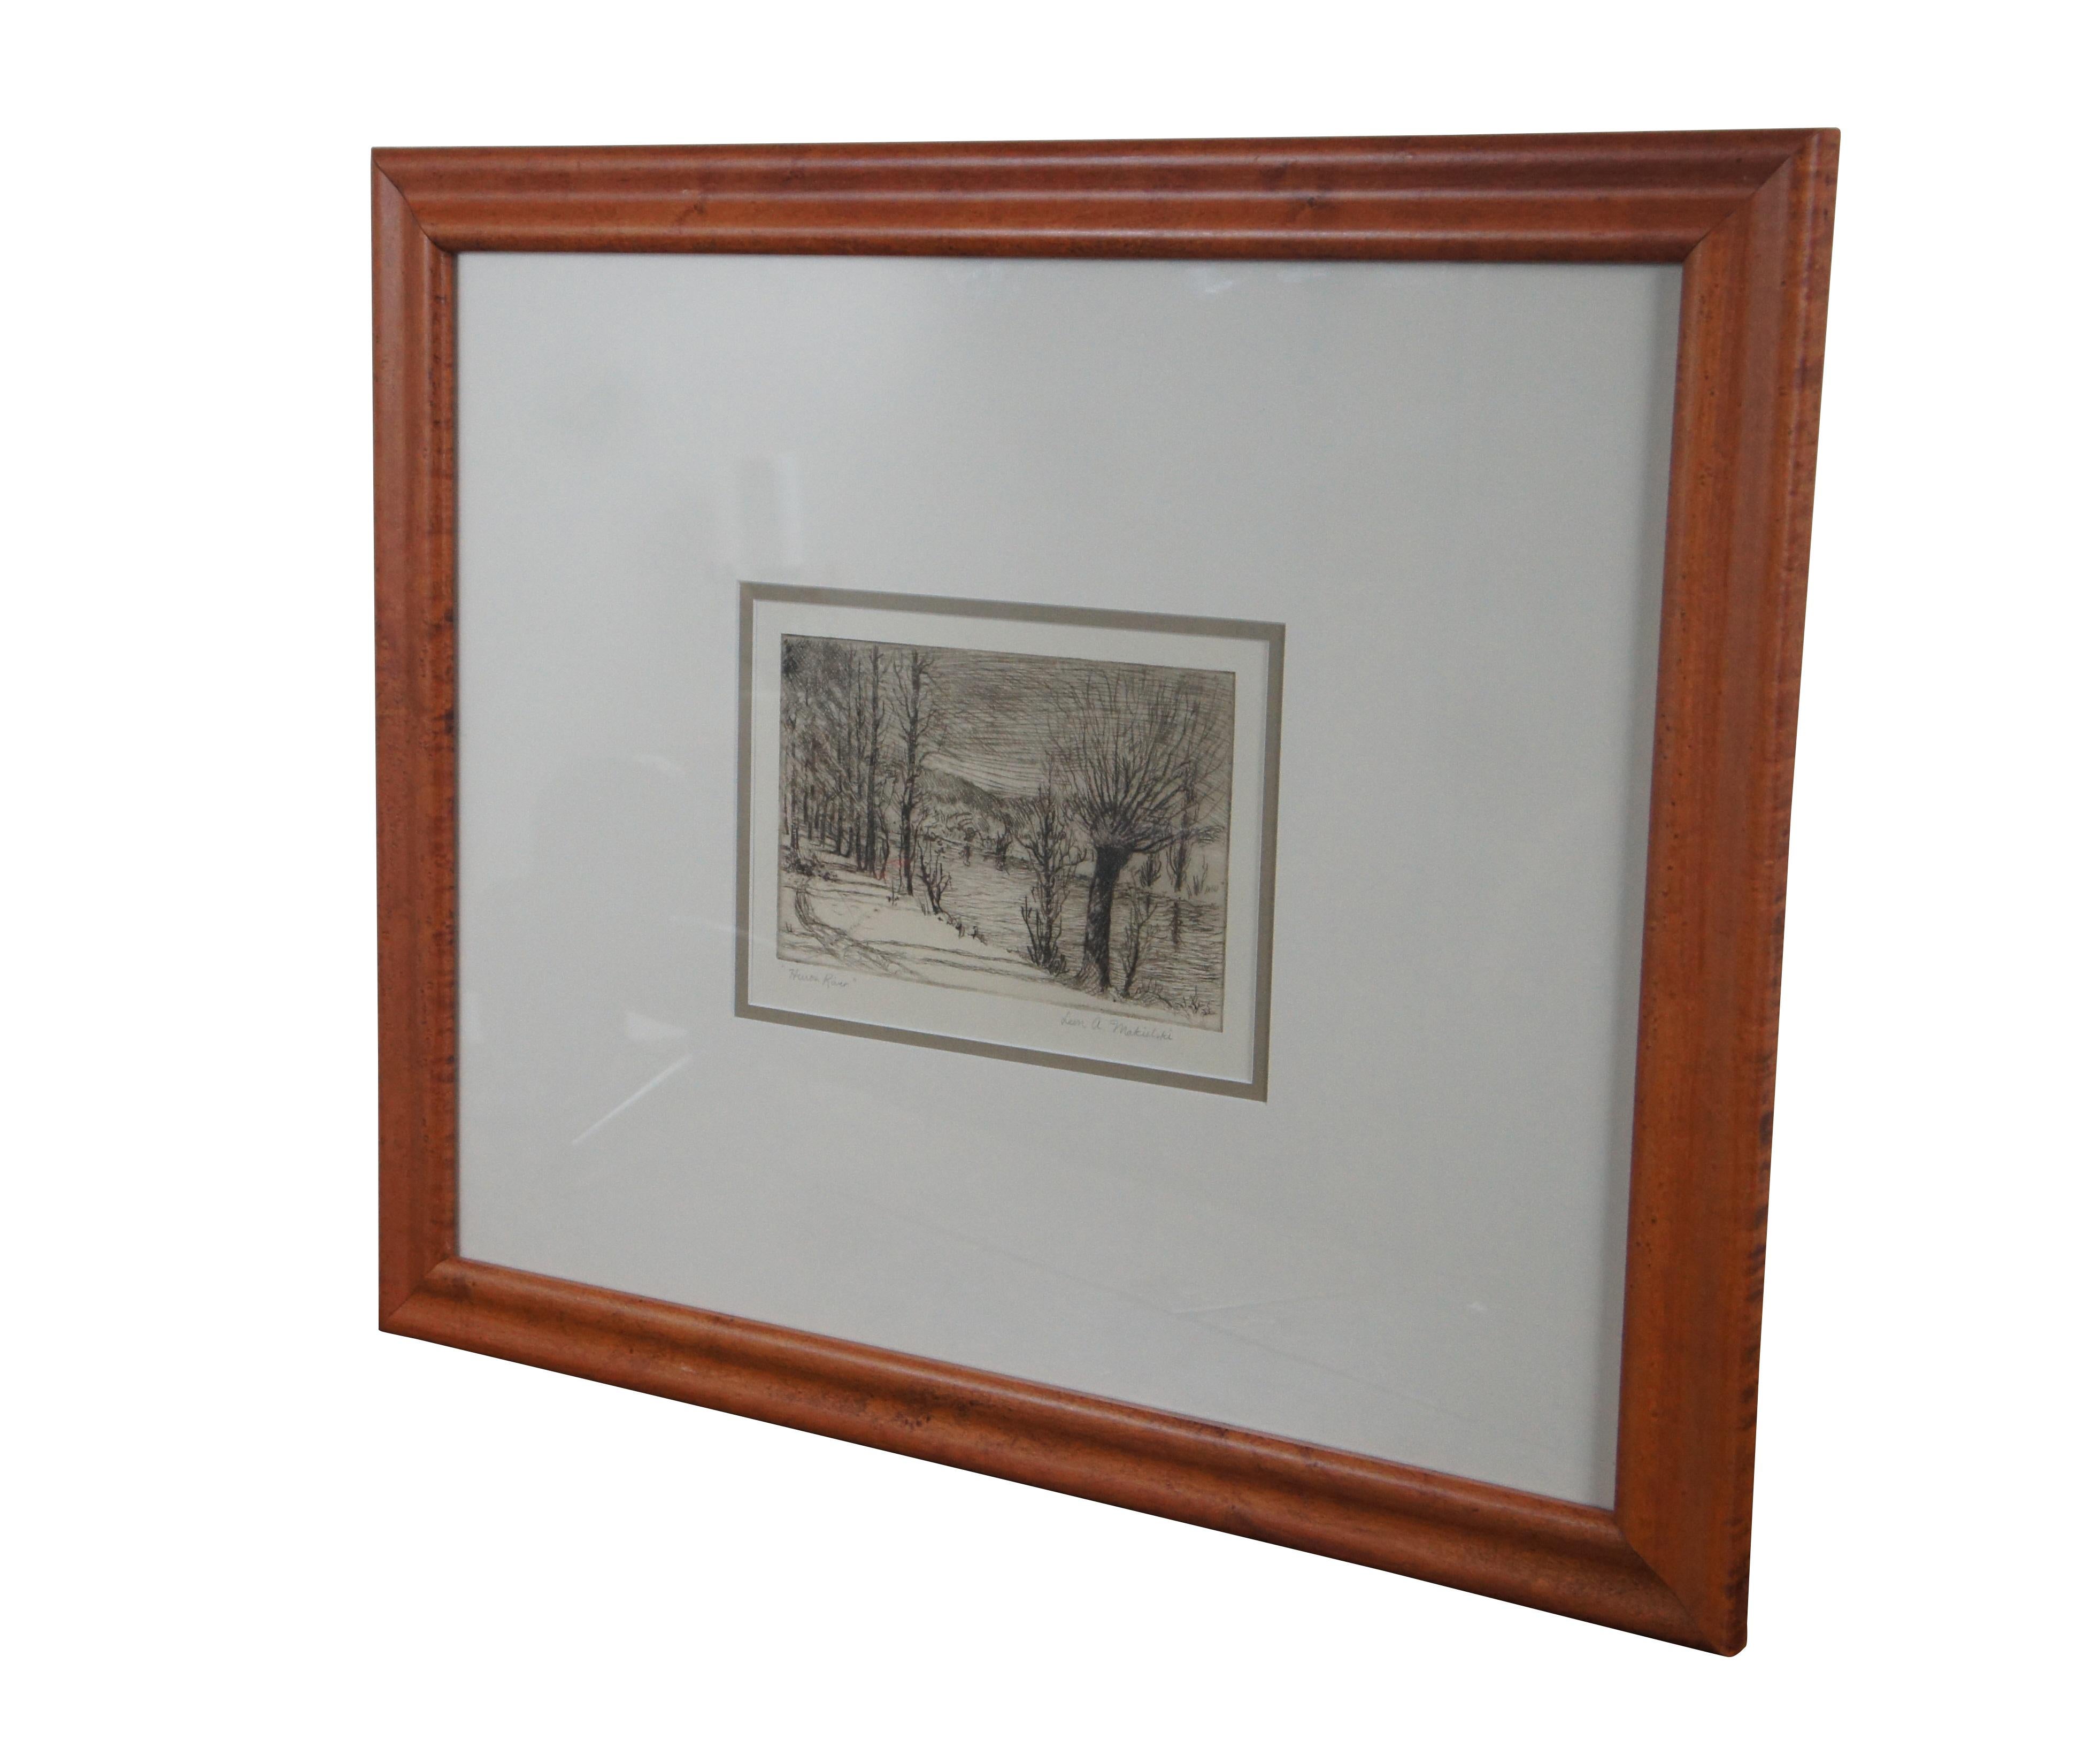 Antique circa 1930's pencil signed etching by Leon A. Makielski titled 